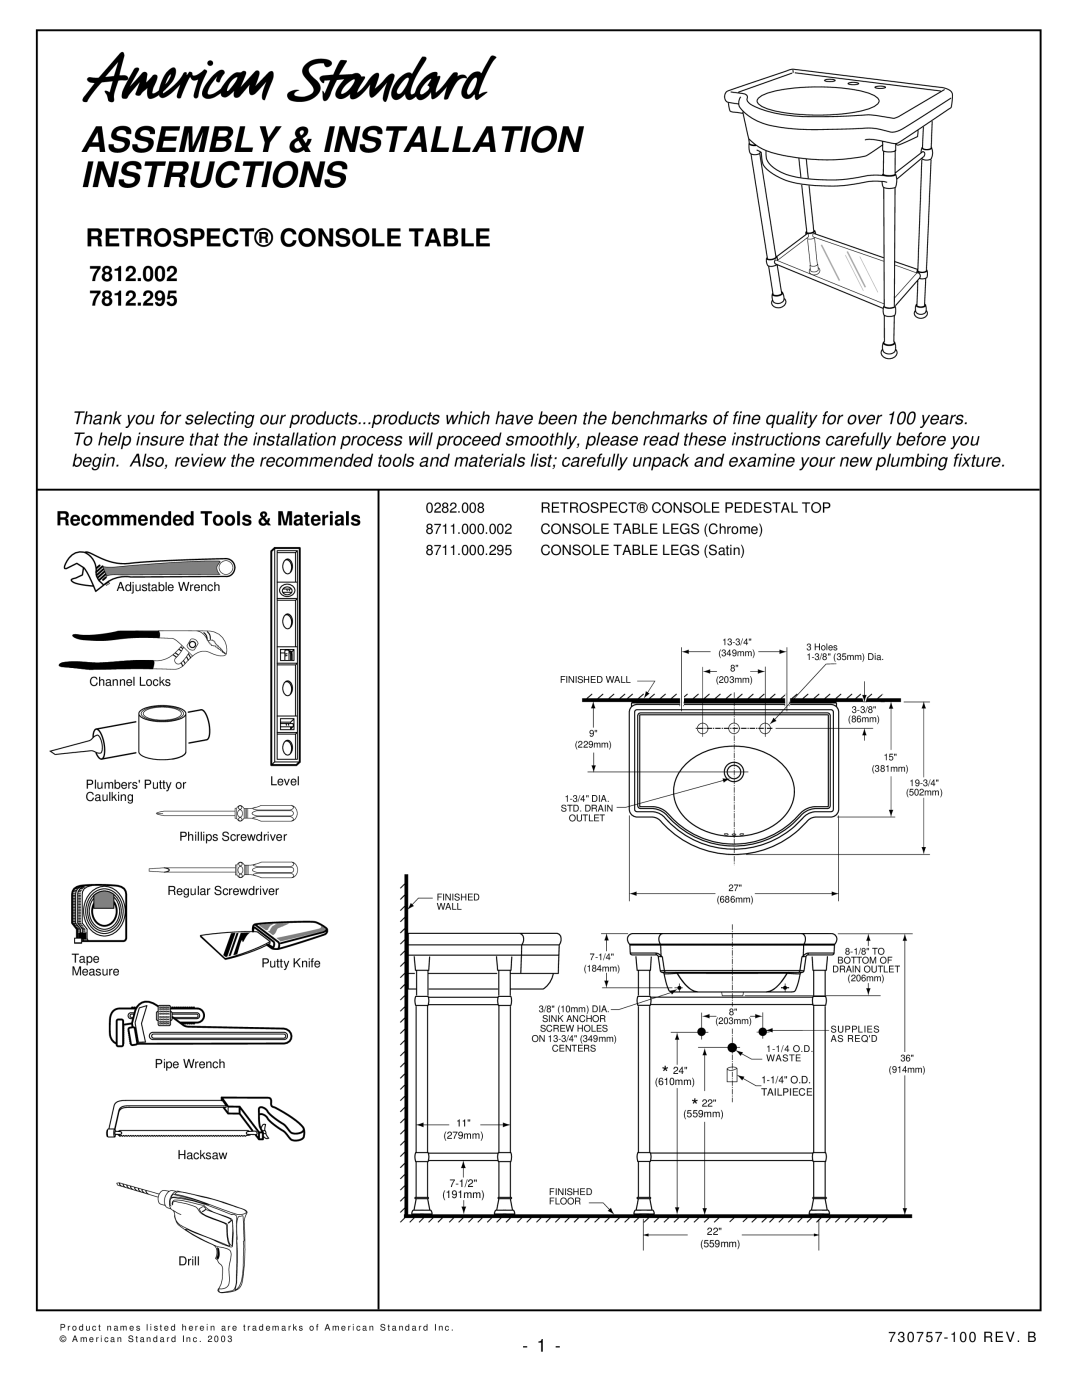 American Standard 7812.002 installation instructions Assembly & Installation Instructions, Retrospect Console Table 